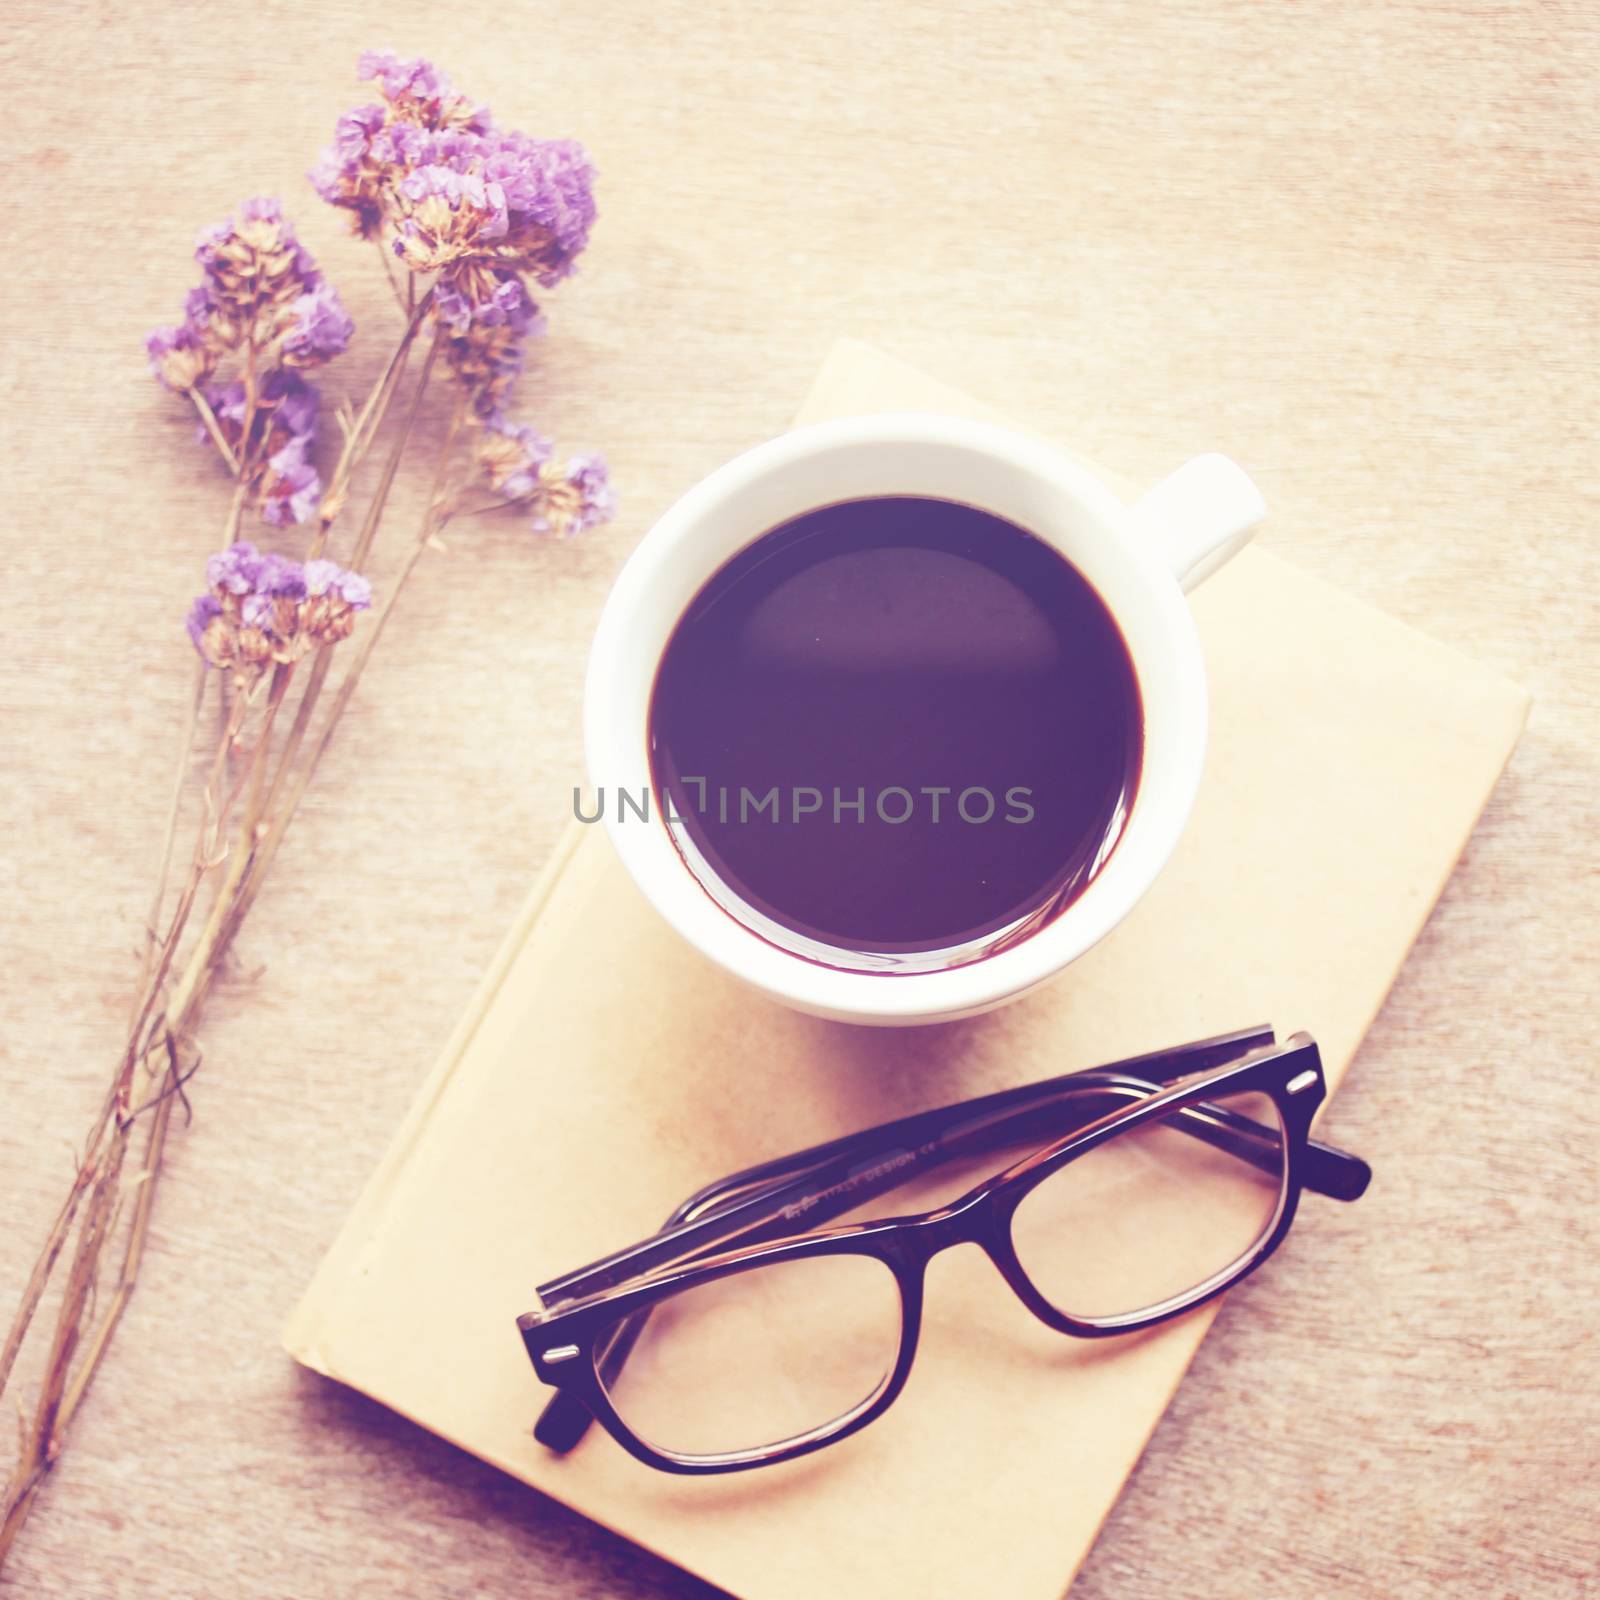 Black coffee on notebook with eyeglasses, retro filter effect